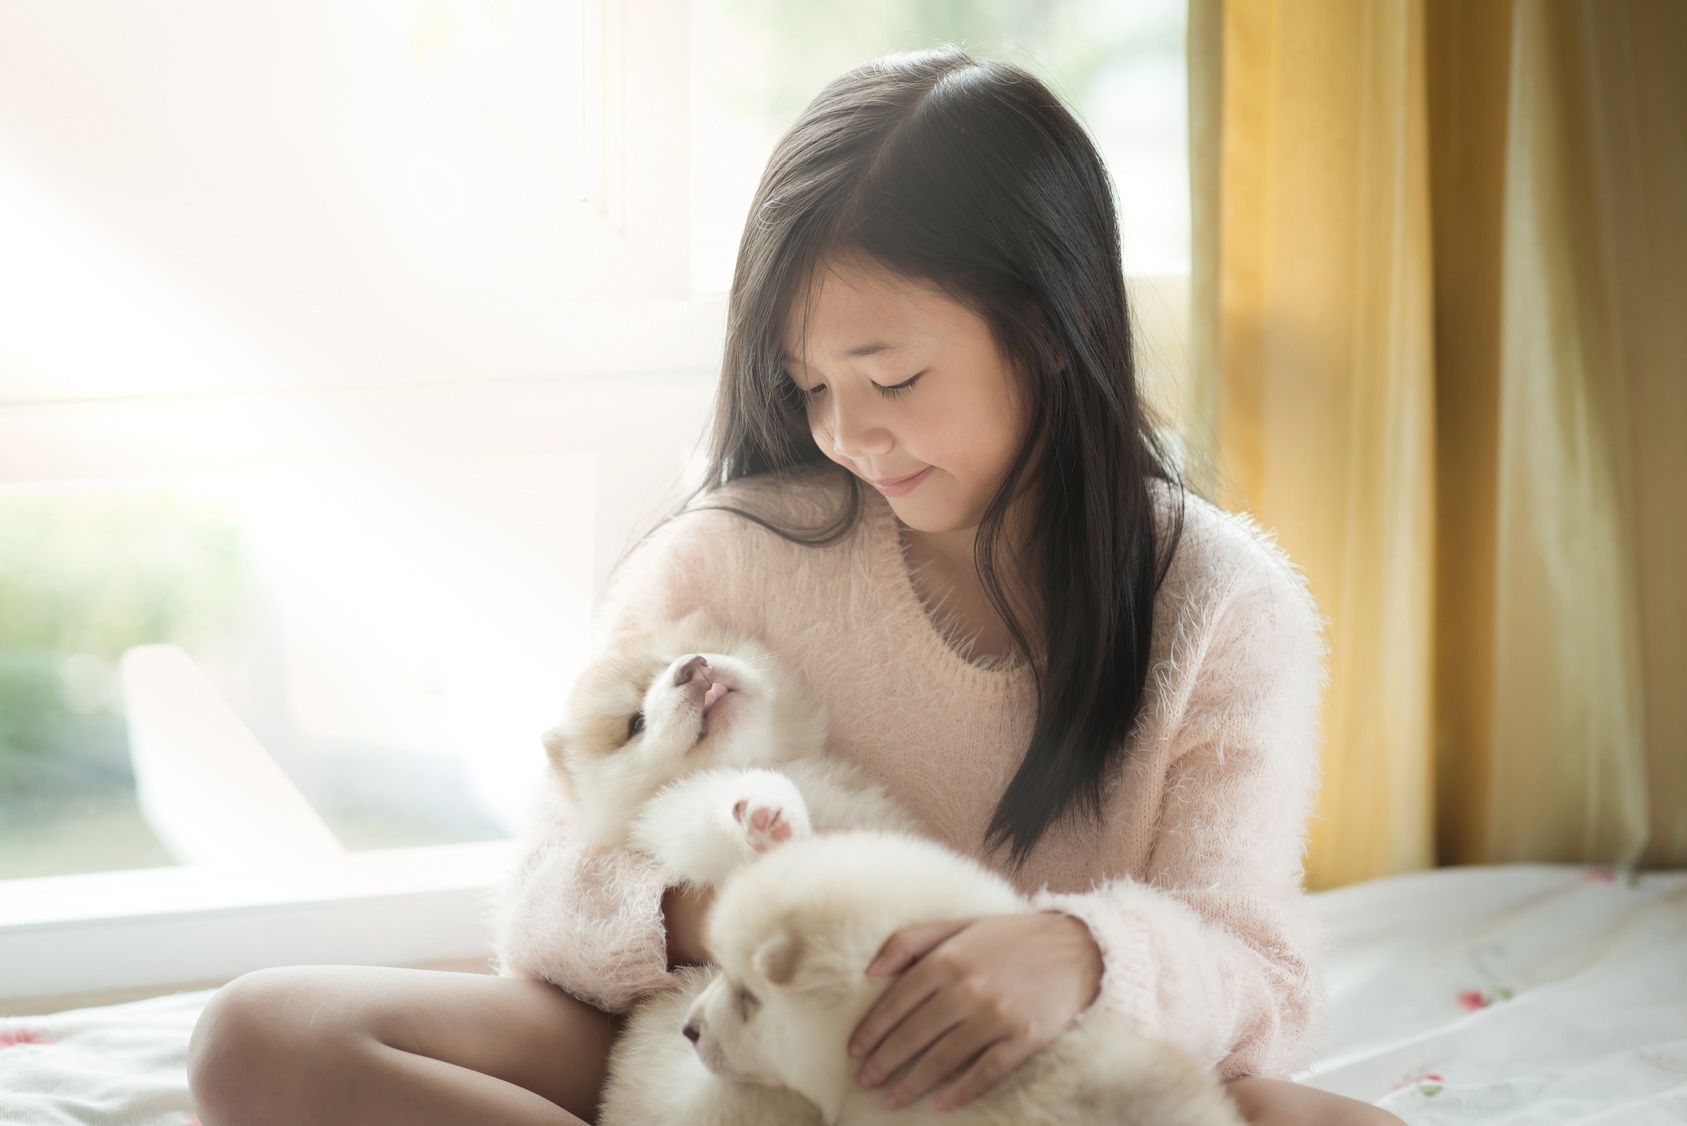 Little asian playing with siberian husky puppies on the bed,vintage filter